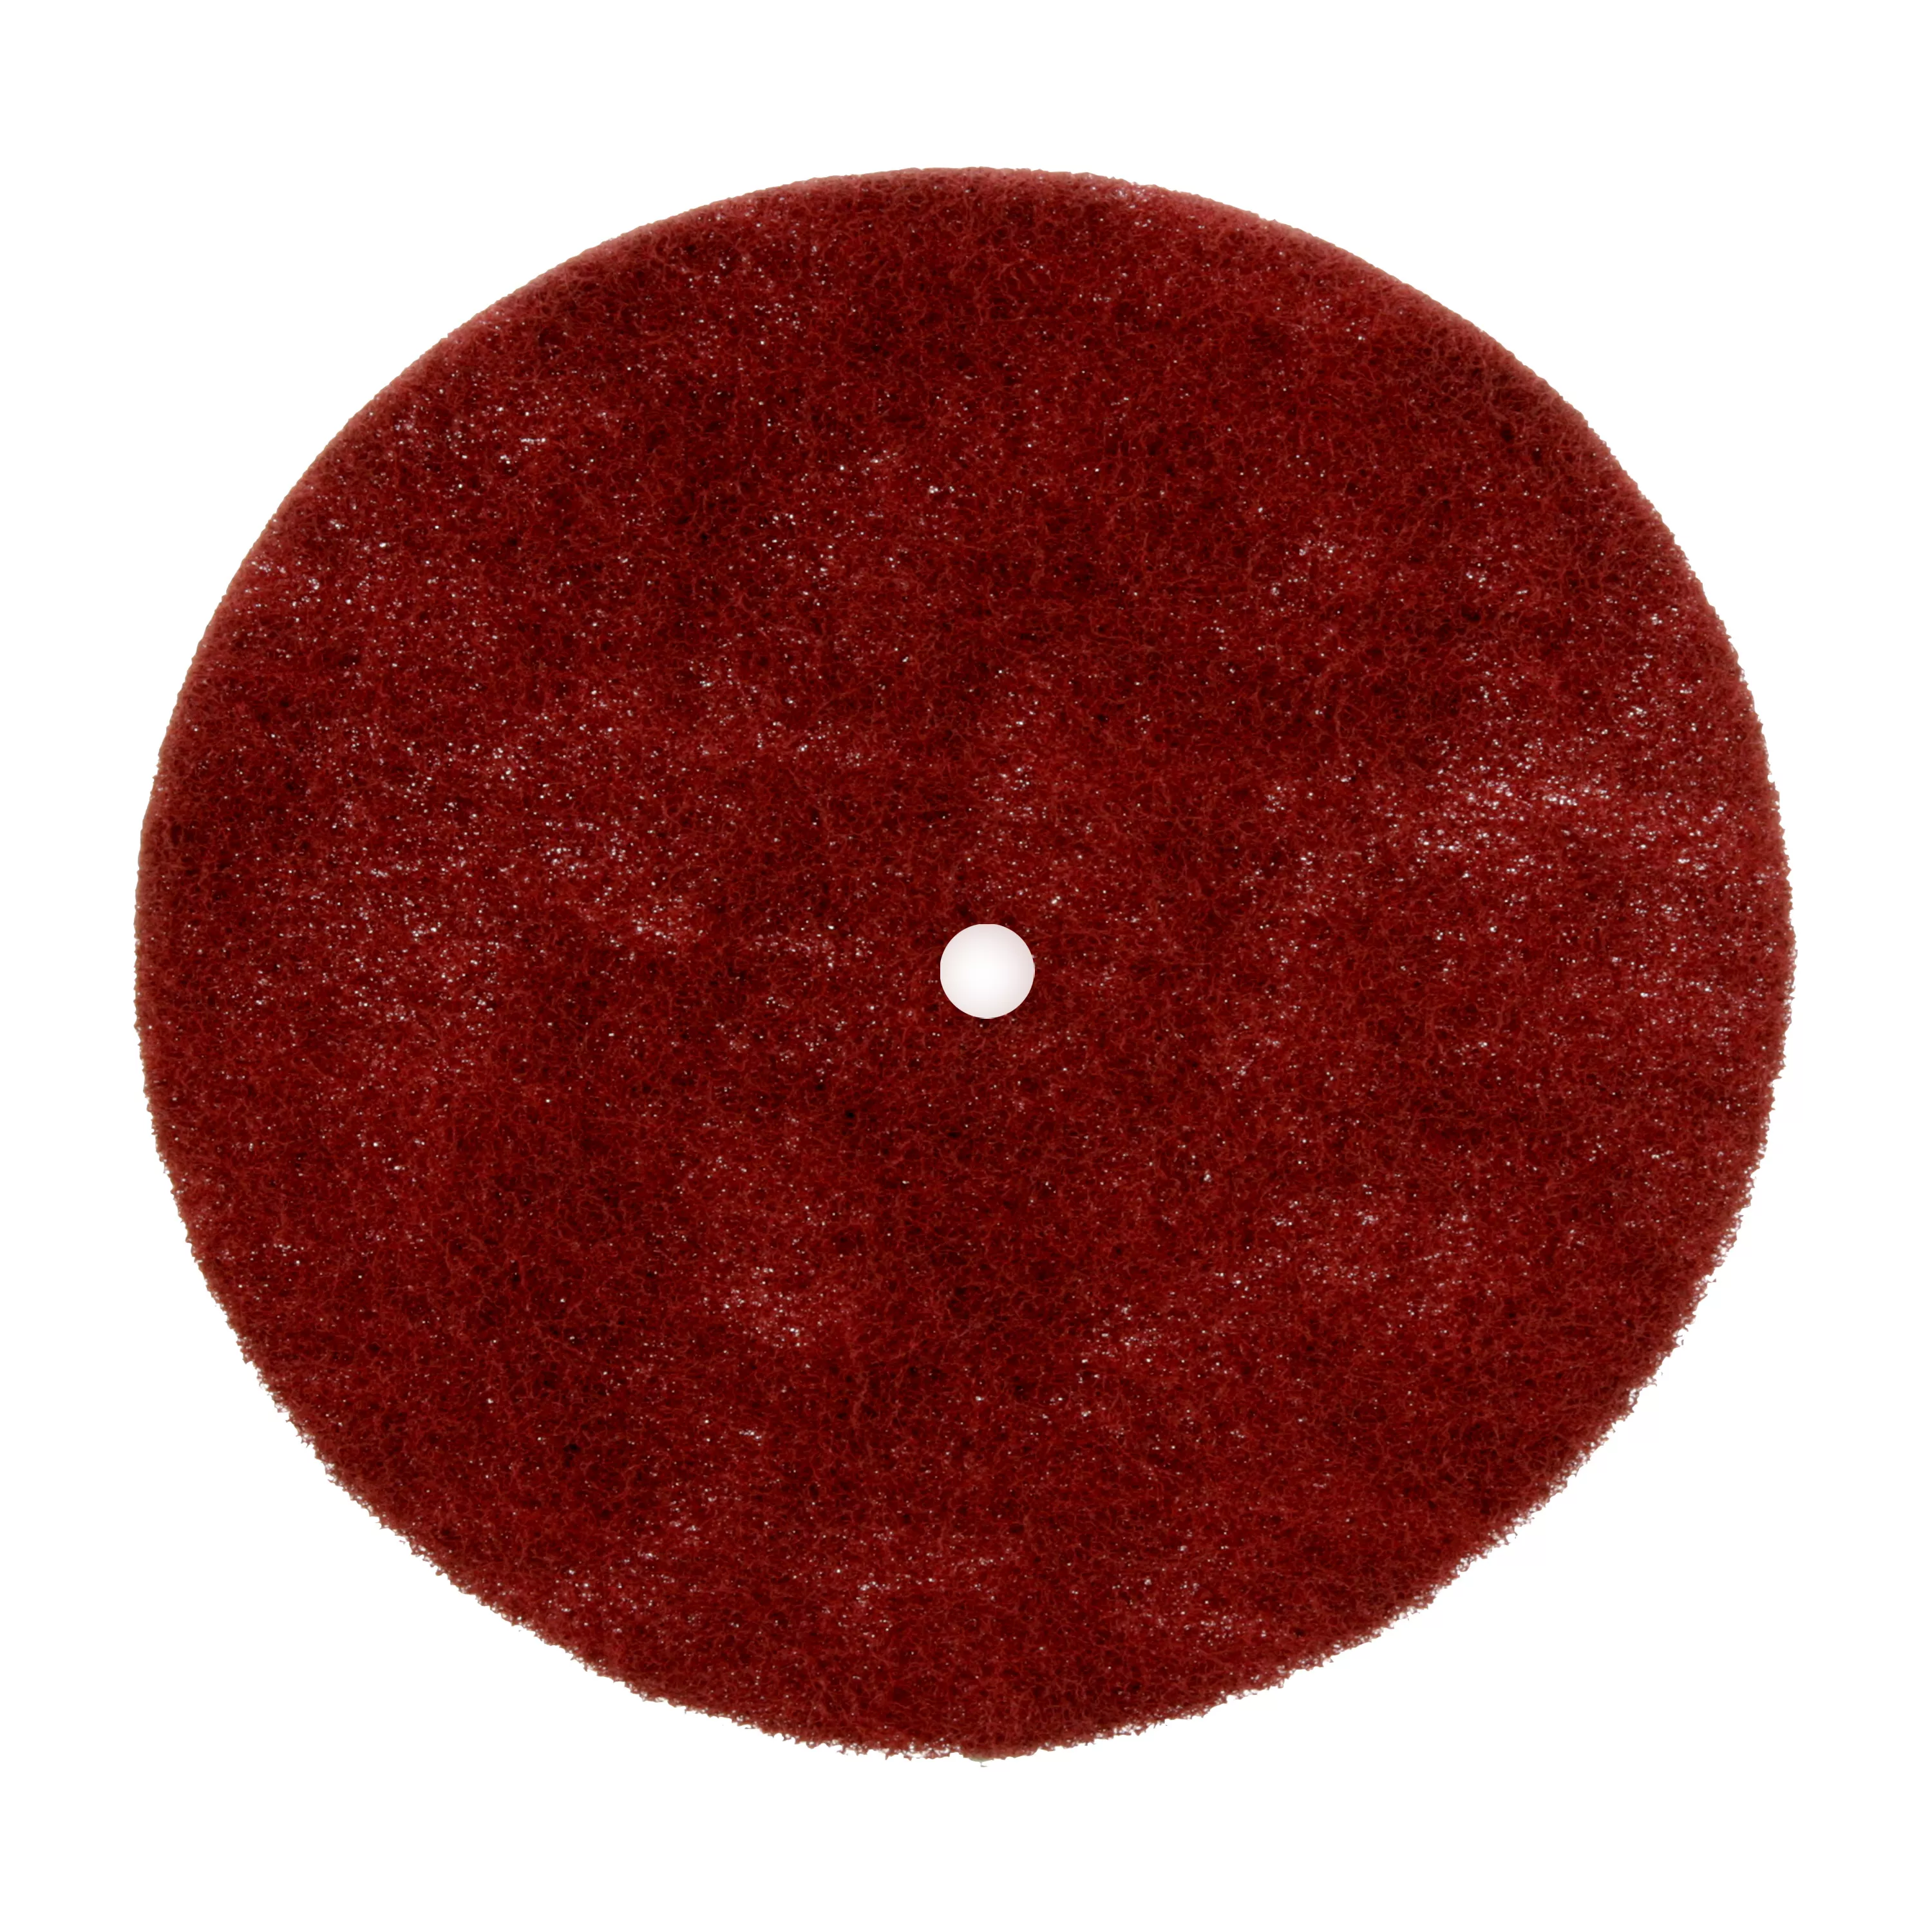 Standard Abrasives™ Buff and Blend HS Disc, 863708, 6 in x 1/4 in A VFN,
10/Pac, 100 ea/Case